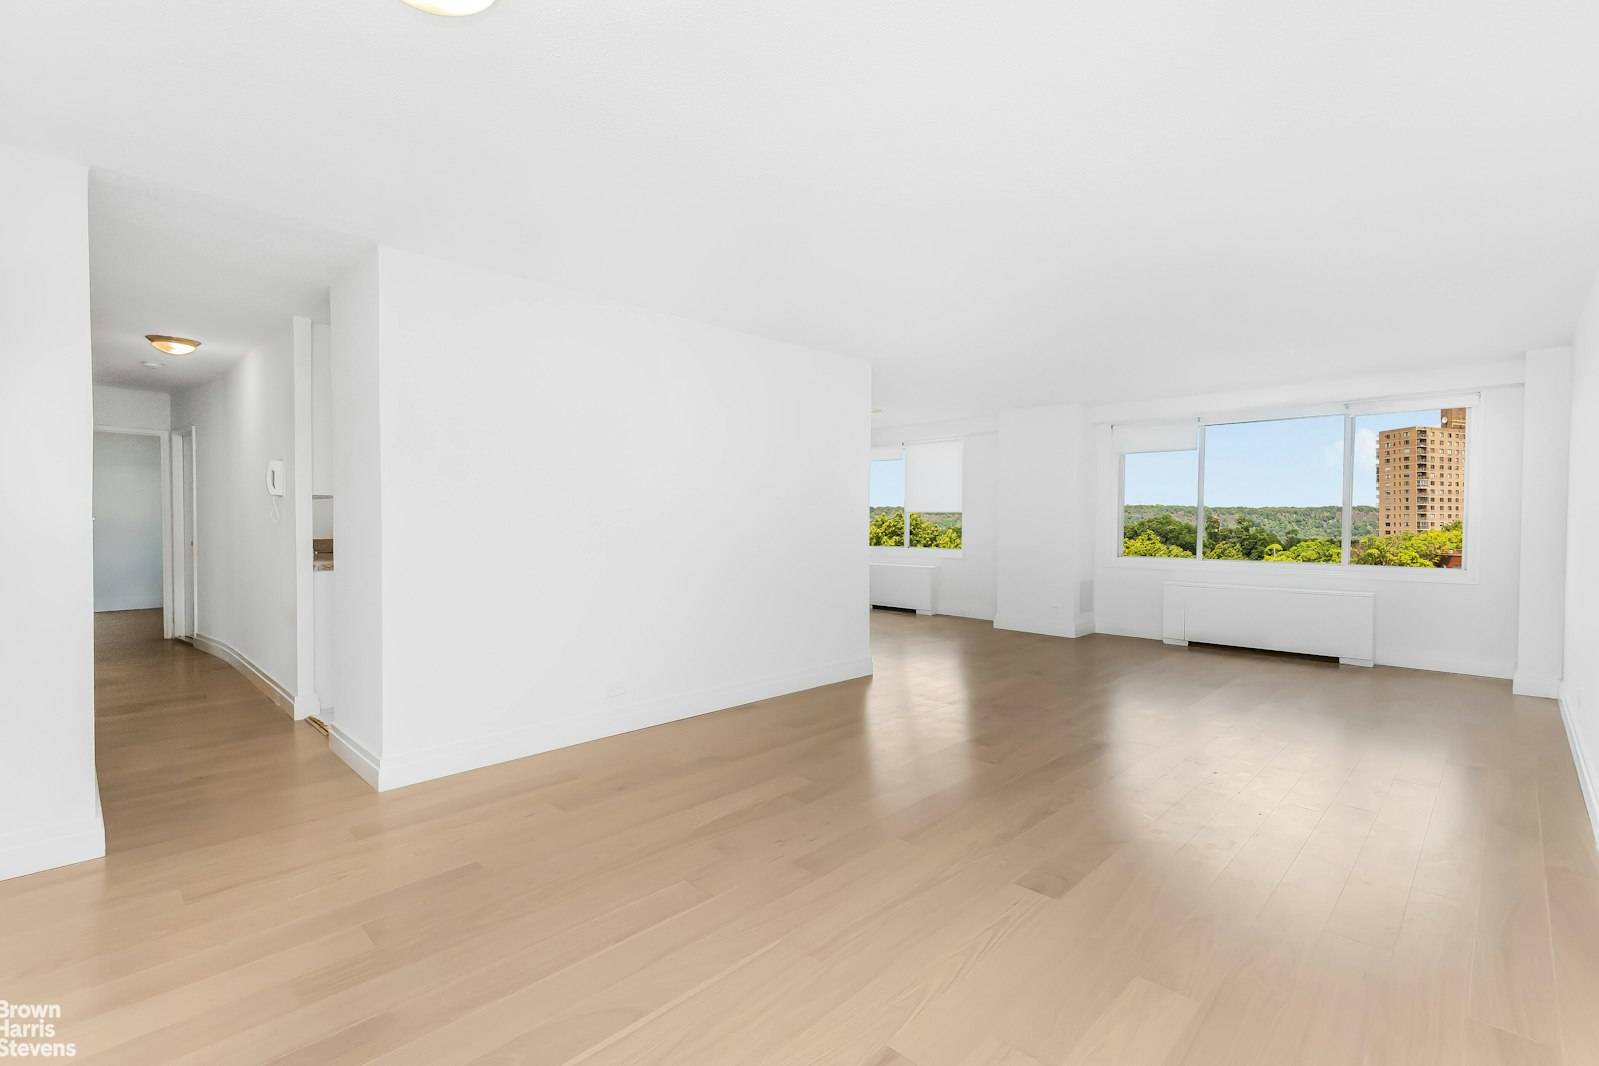 No Board Approval for this large two bedroom, two bath apartment with an 18 ft.